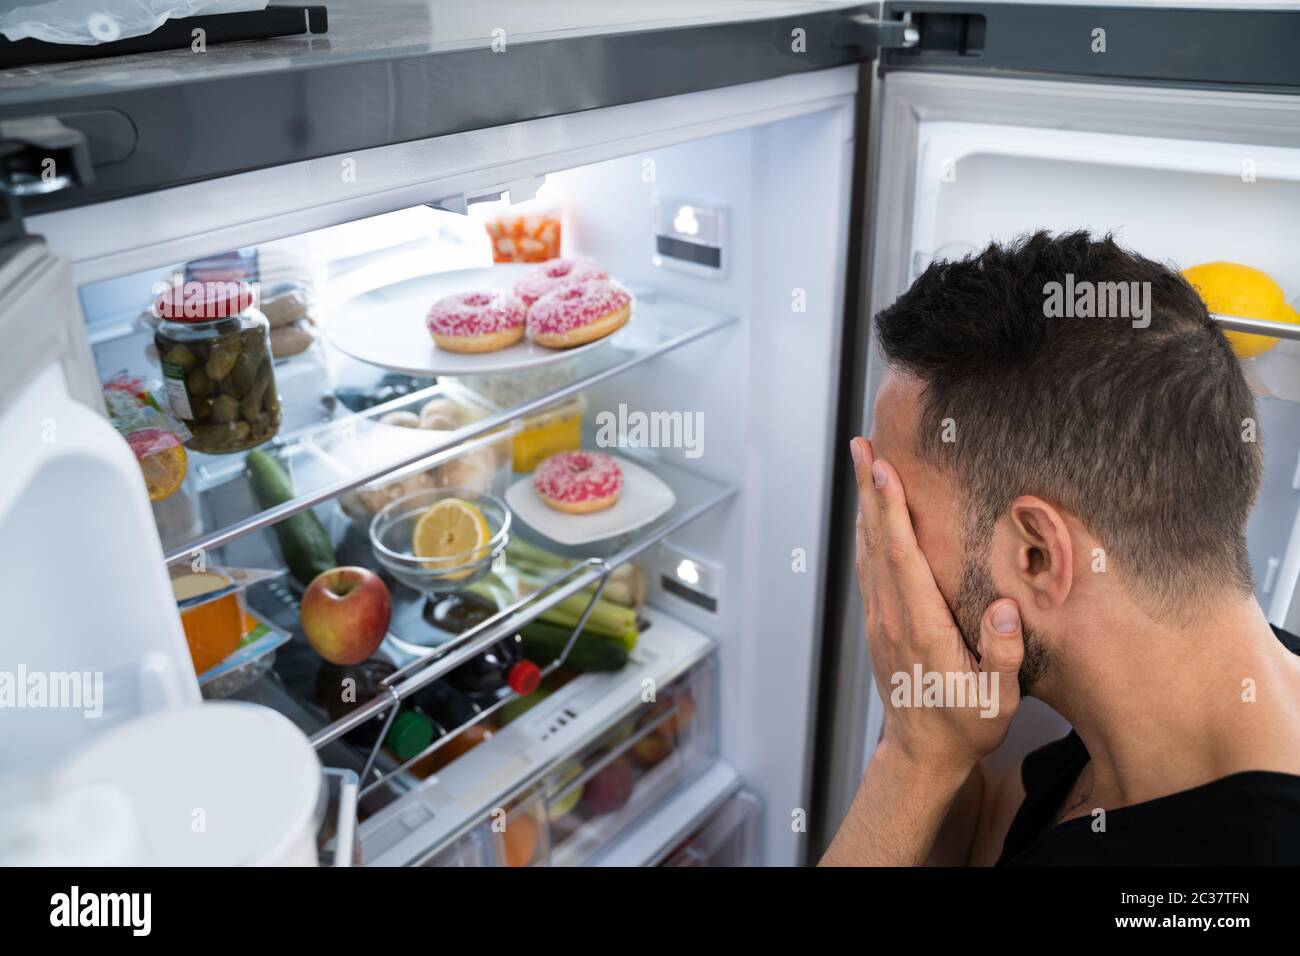 Bad Rotten Stink Smell In Fridge Or Refrigerator Stock Photo